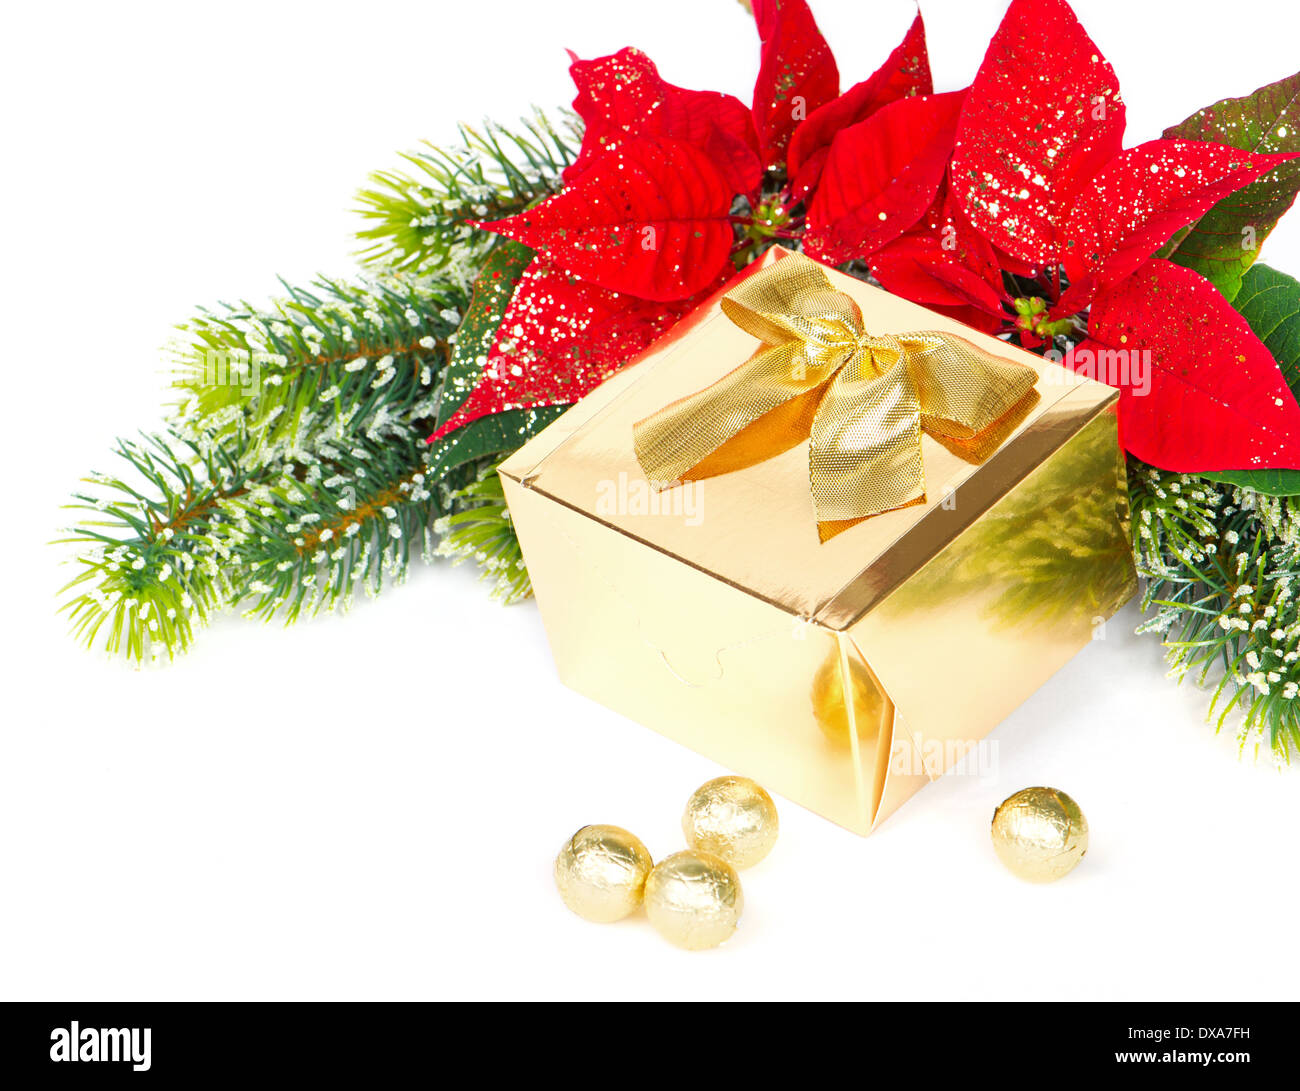 golden gift and red christmas flower poinsettia. festive decoration Stock Photo